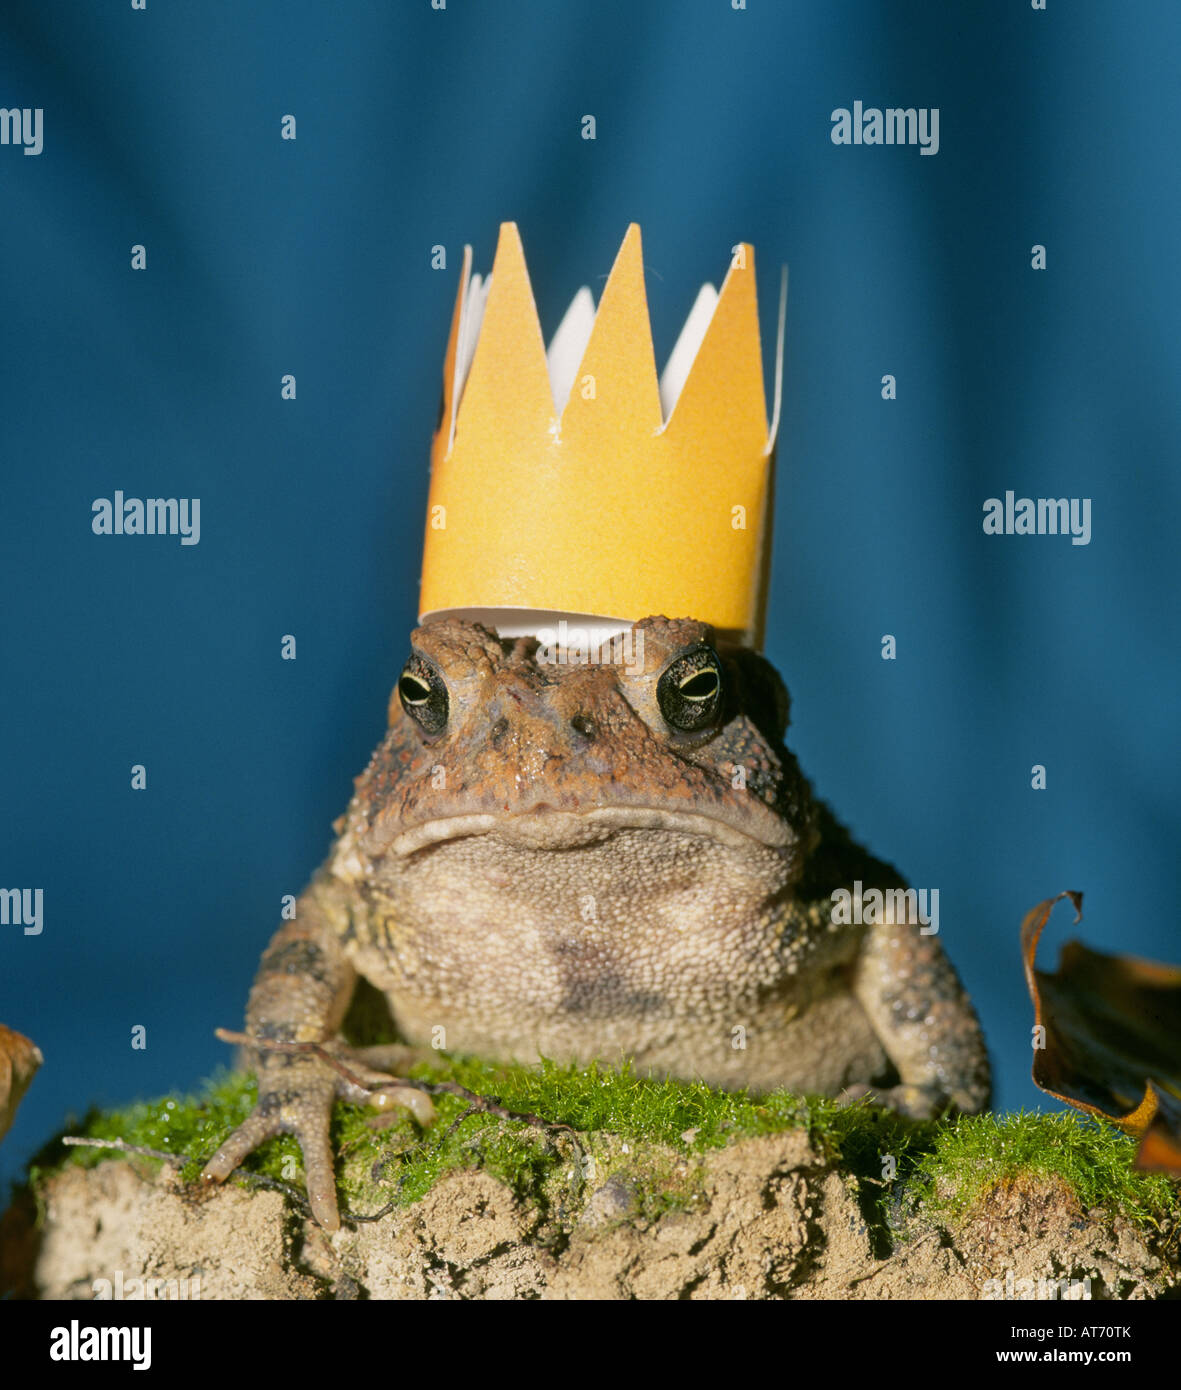 Detail of an American eastern toad wearing a gold crown in a hardwood forest. Stock Photo